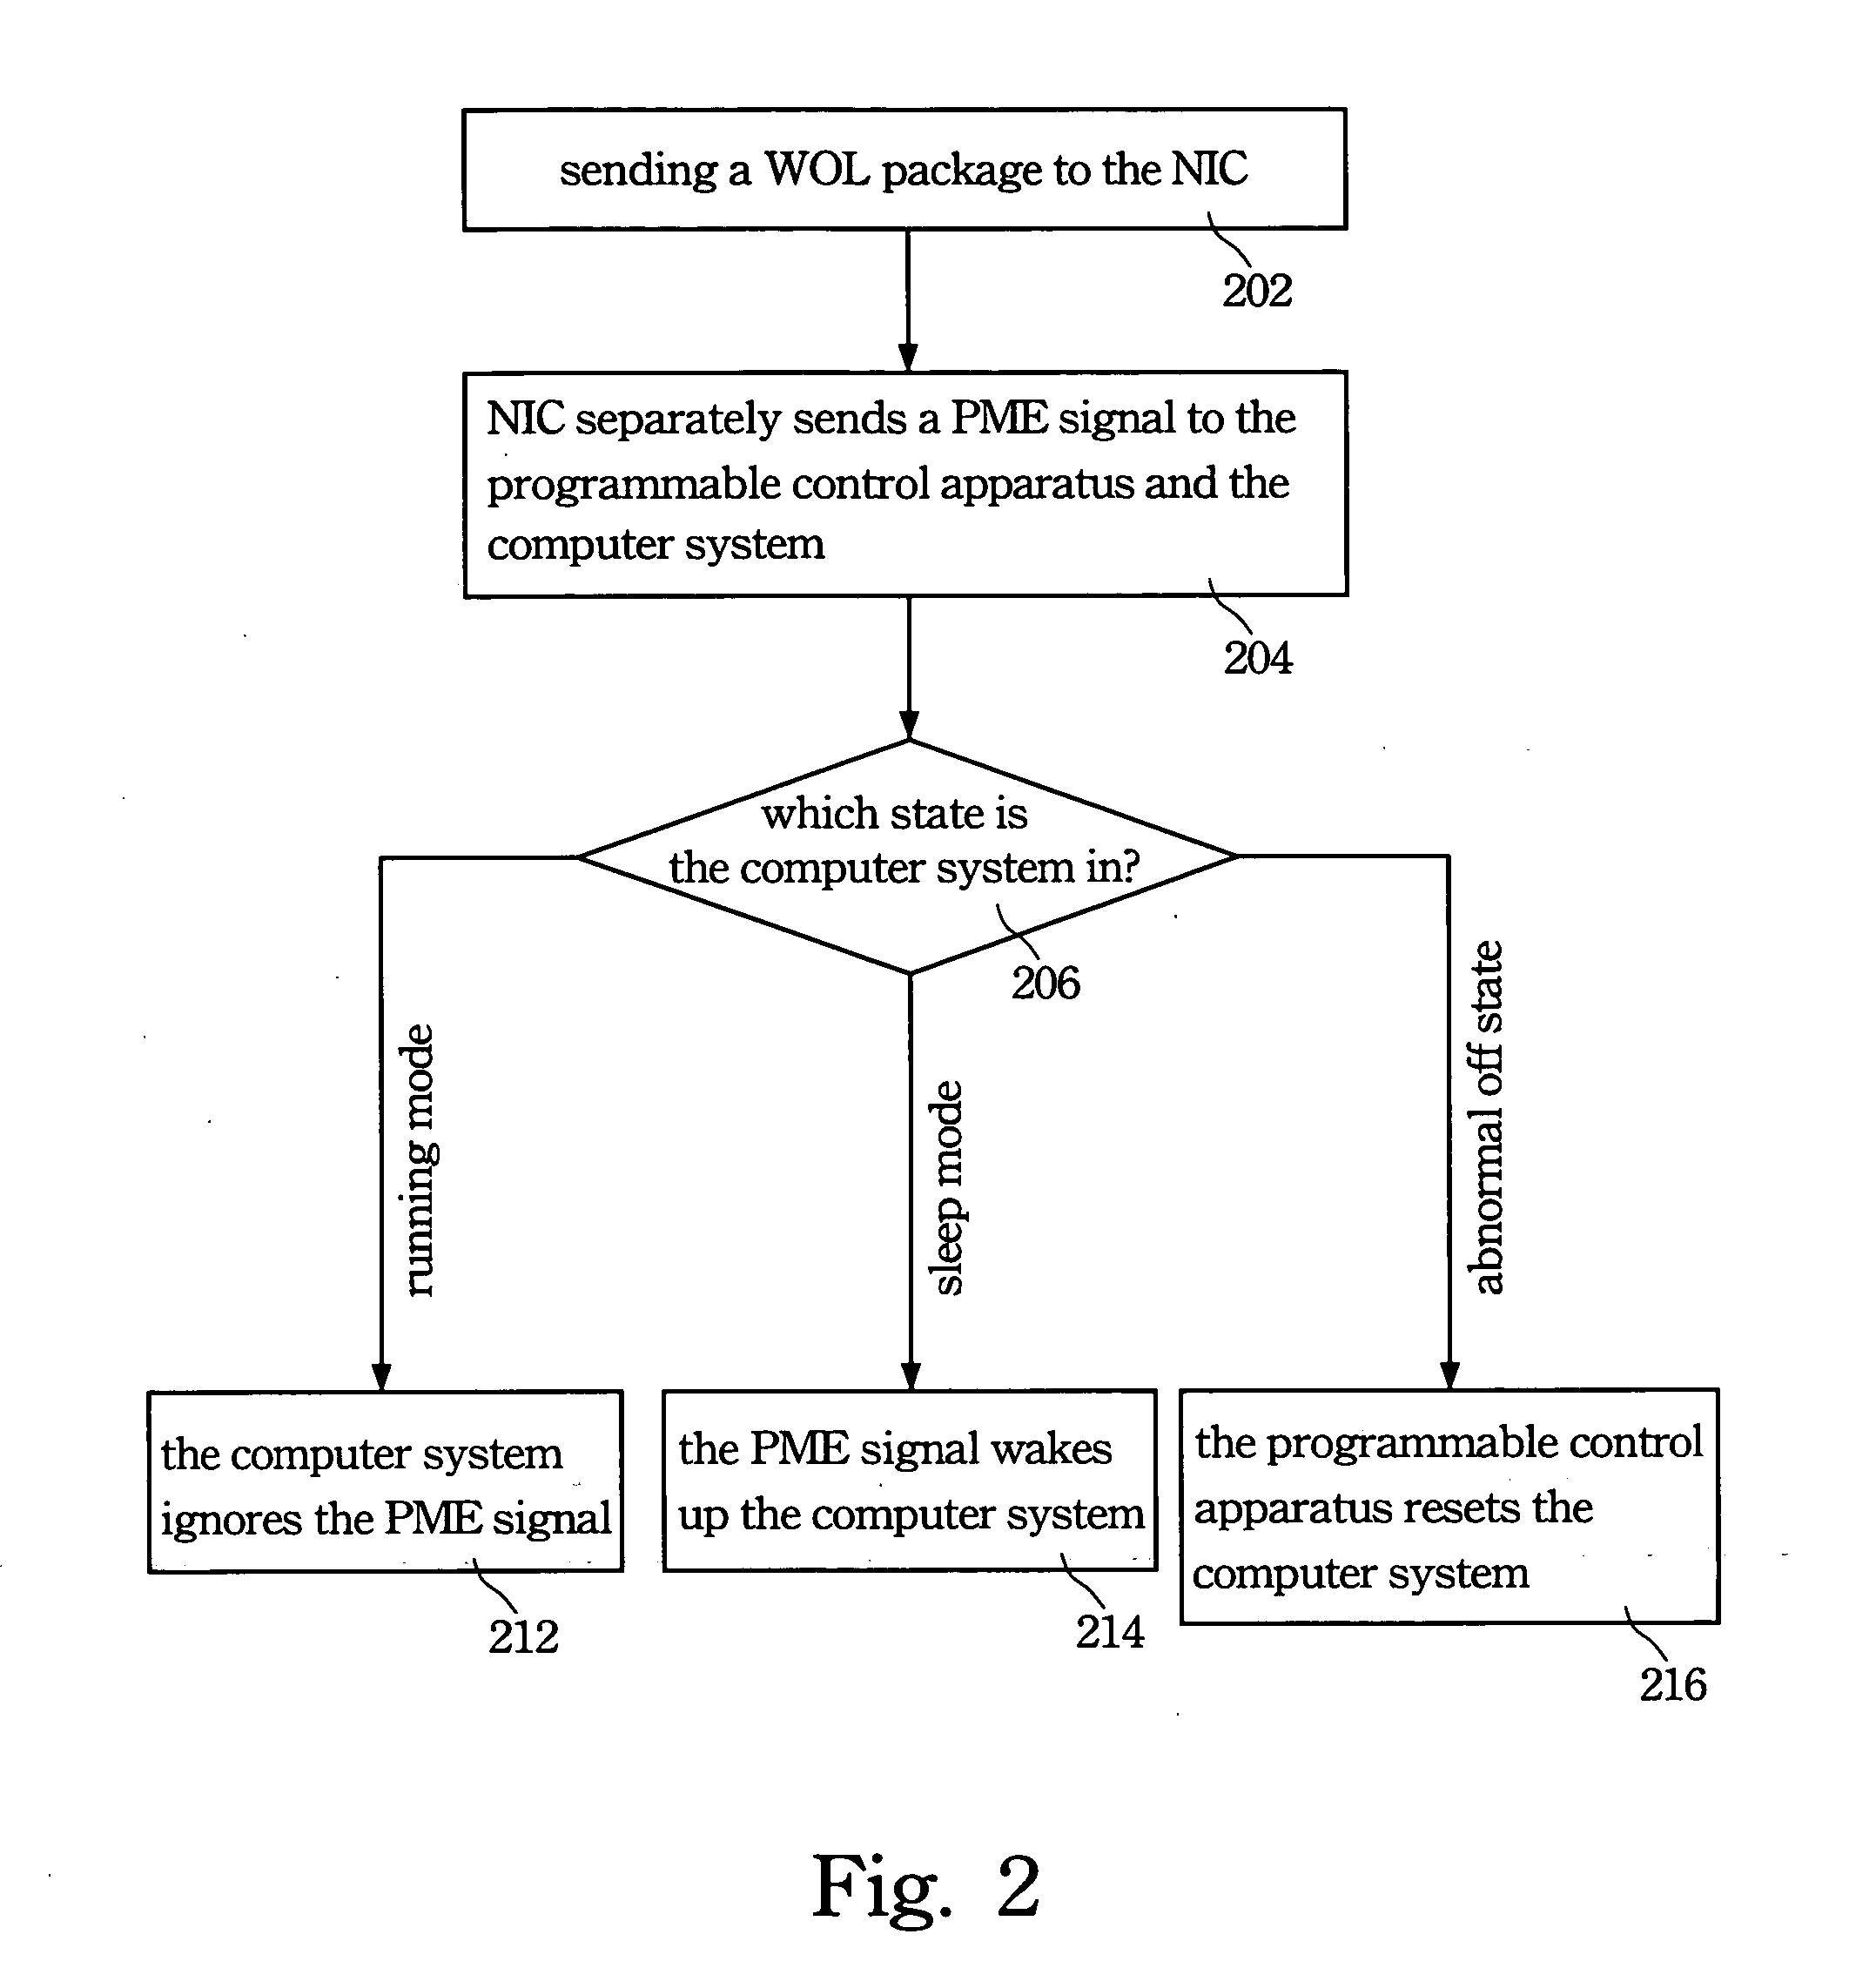 Apparatus and method for wakeup on LAN